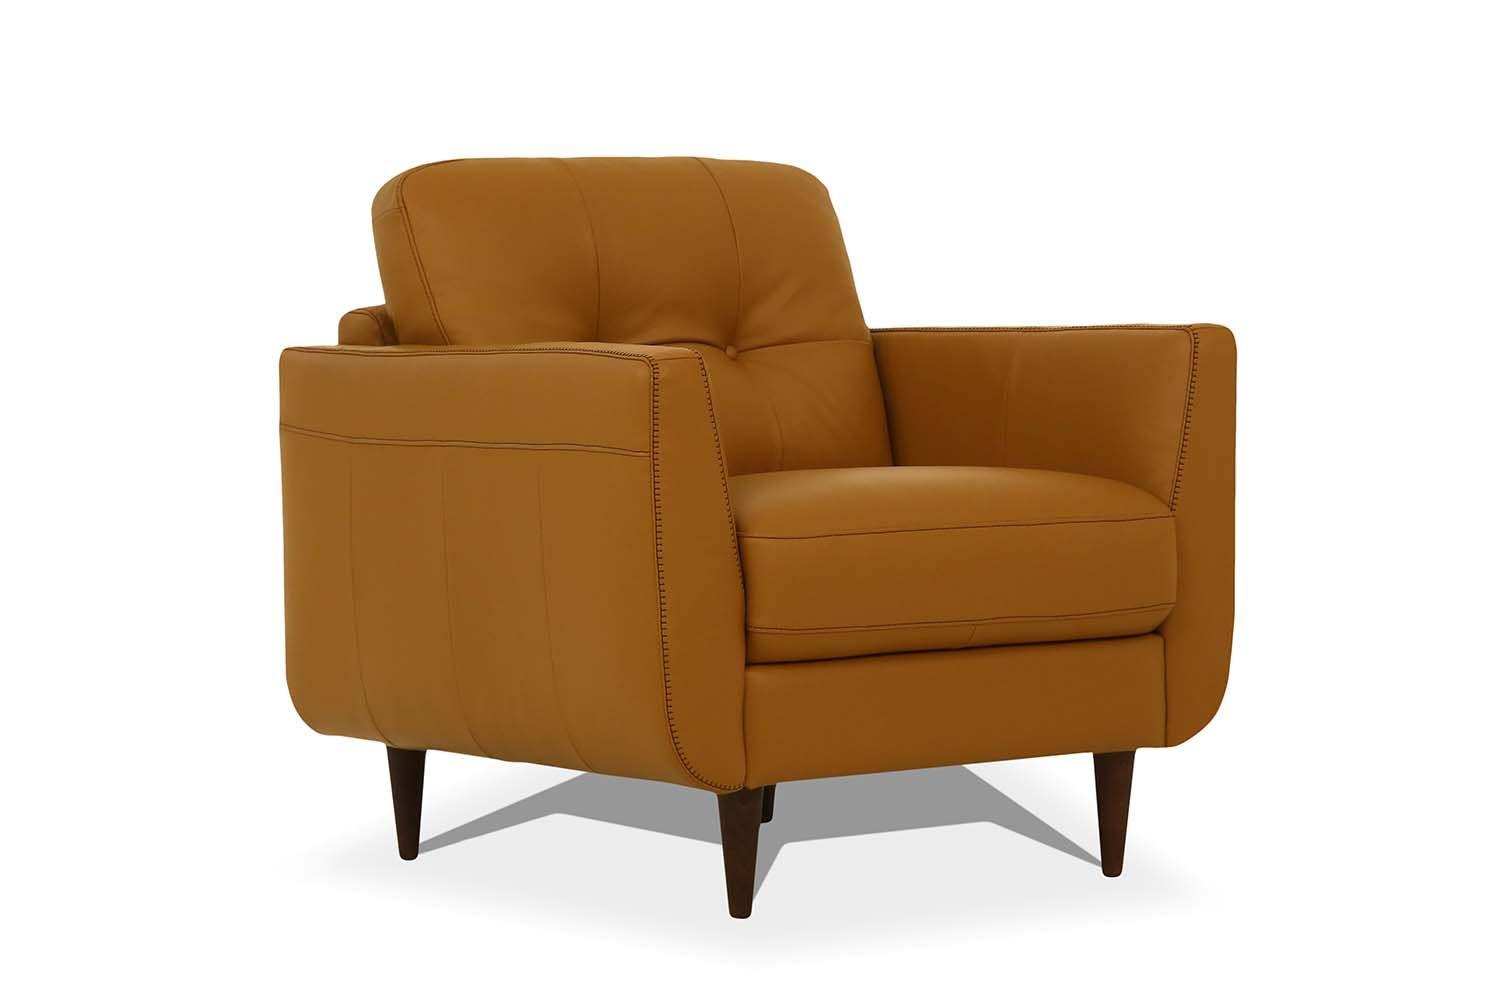 Transitional Chair Radwan 54957 in Camel Leather